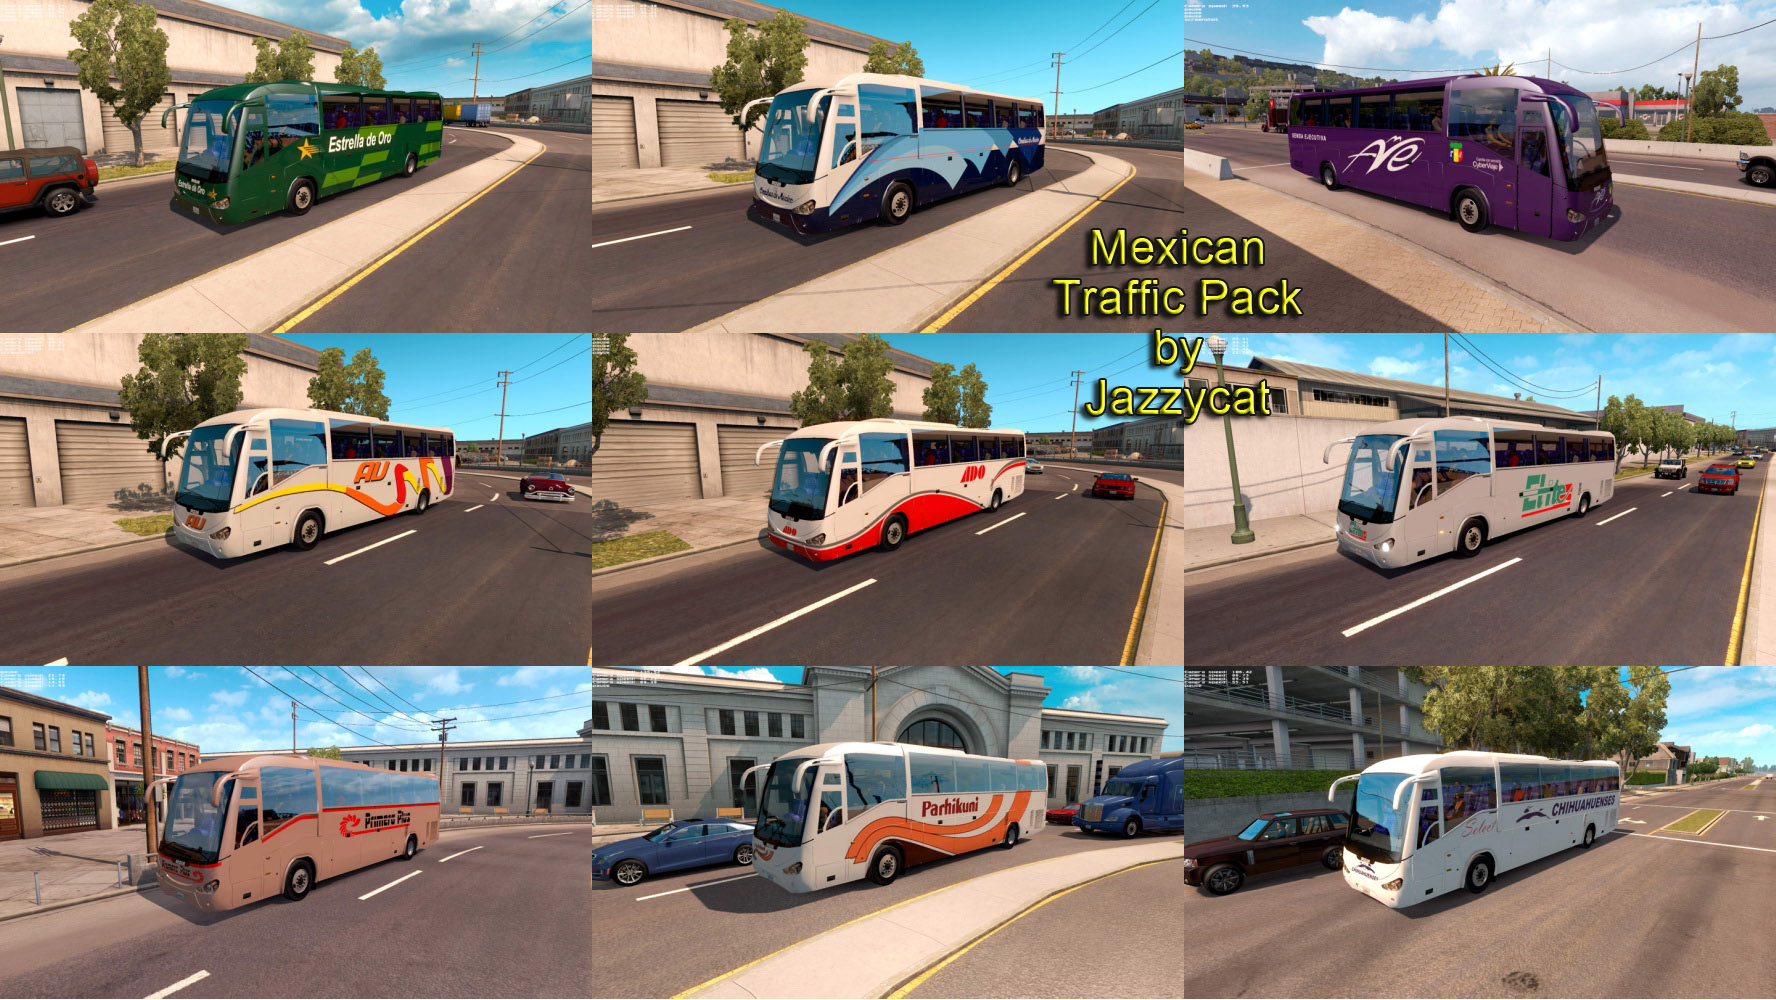 02 mexican traffic pack by Jazzycat